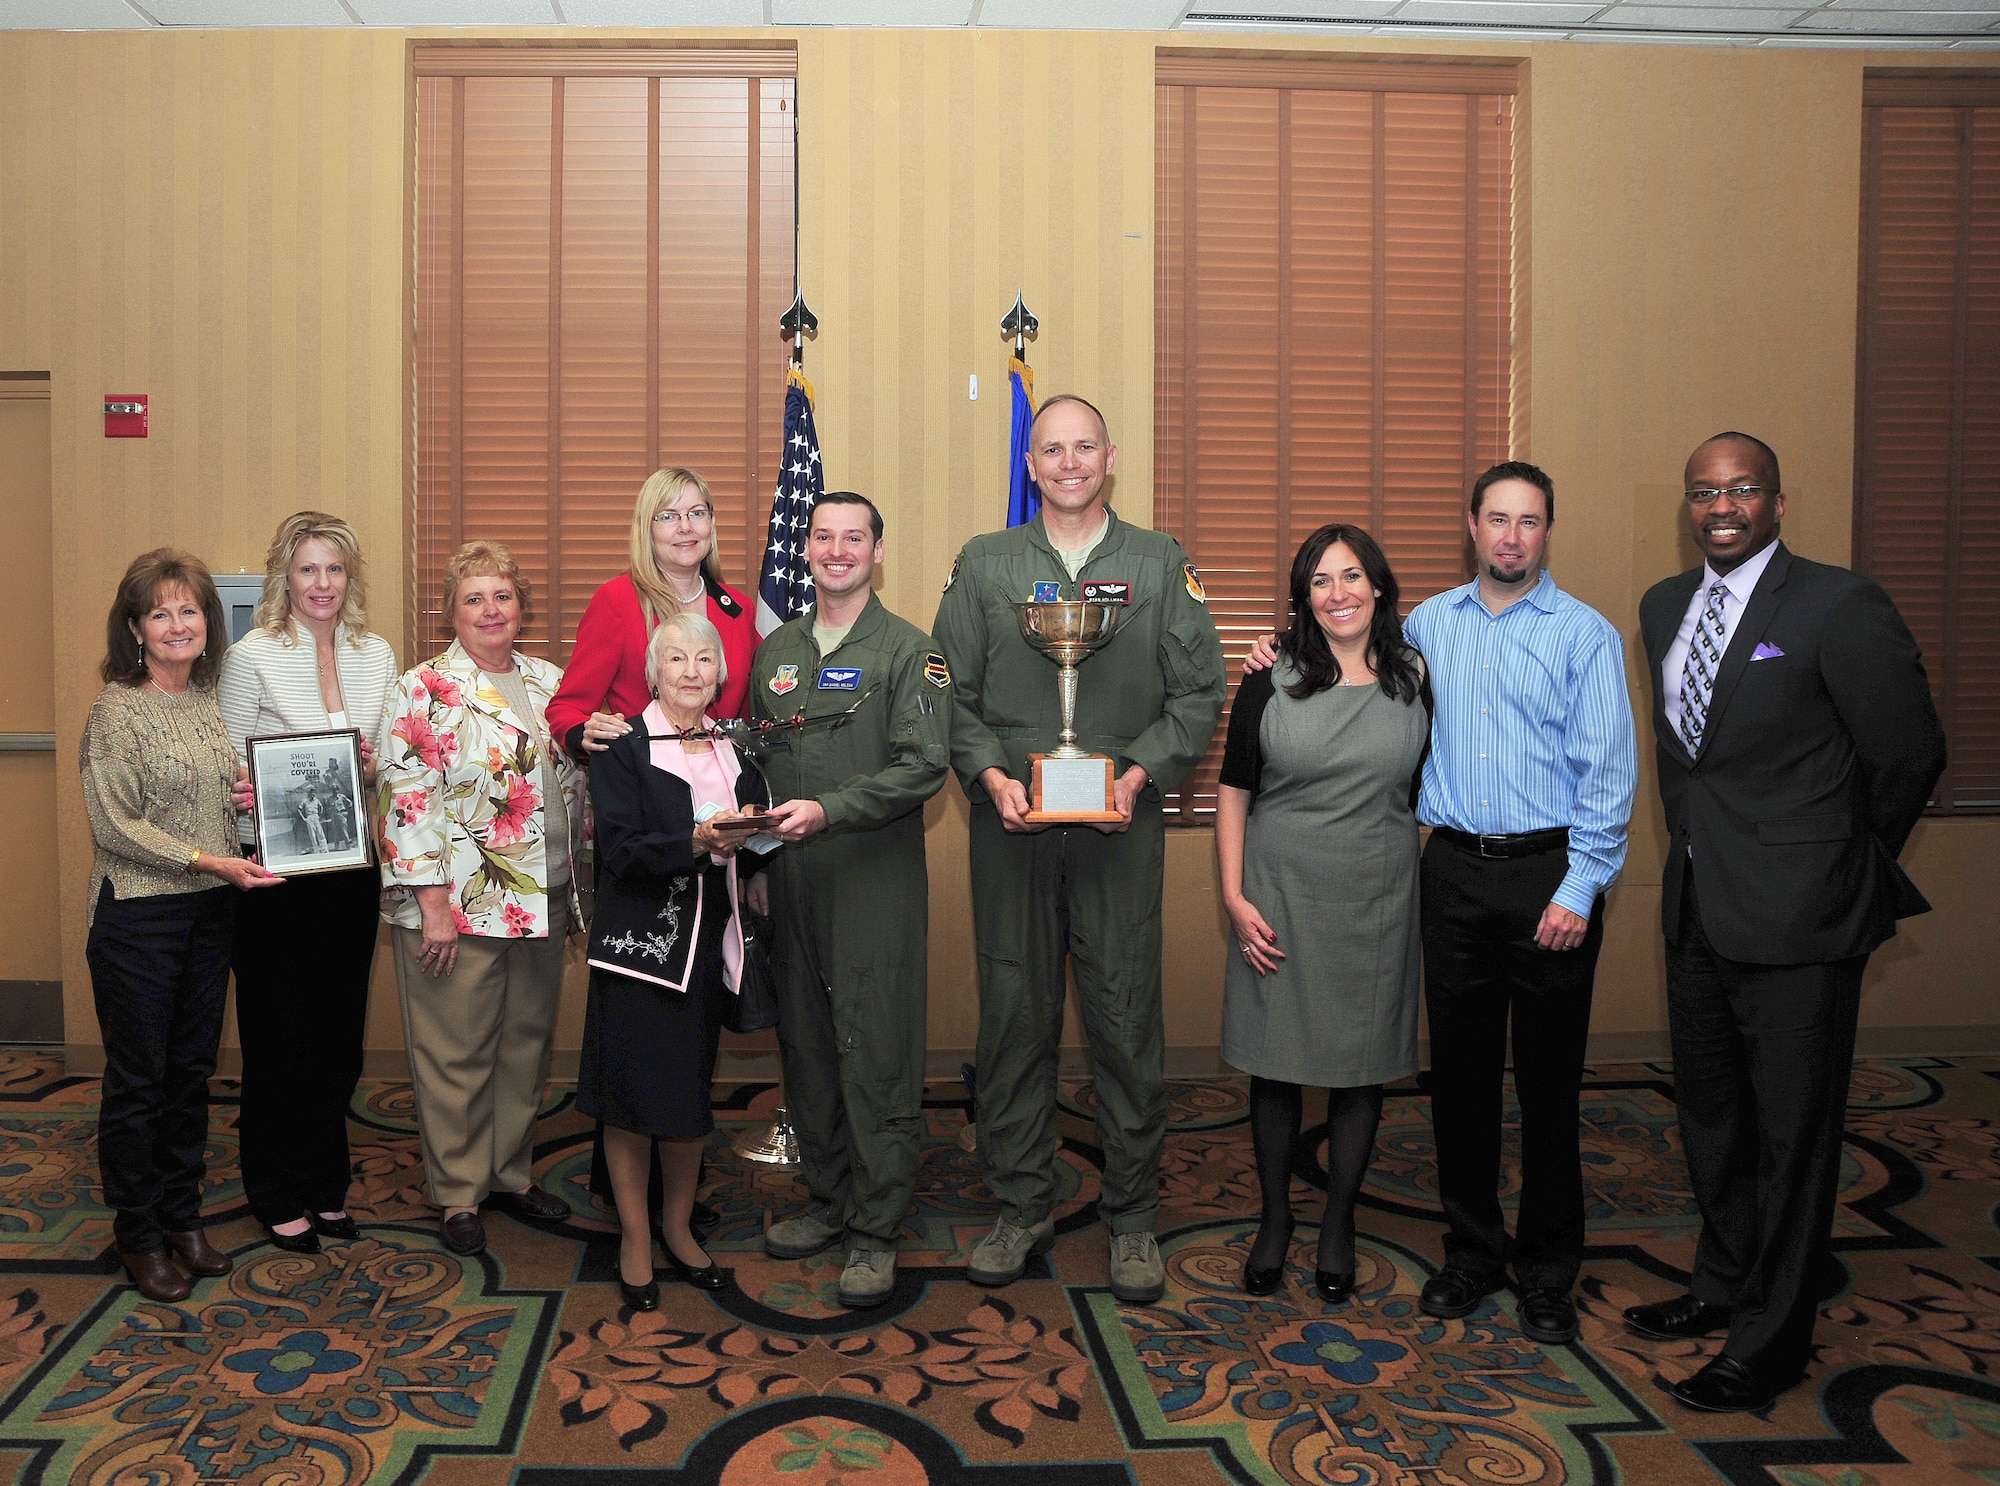 The 612th Support Squadron was awarded the 2012 E.D. Jewett Award by the Tucson Metropolitan Chamber of Commerce, March 7. The E.D. Jewett Award recognizes the squadron at Davis-Monthan AFB that best represents the finest tradition of military excellence and community involvement in the previous year.  (Courtesy photo). 